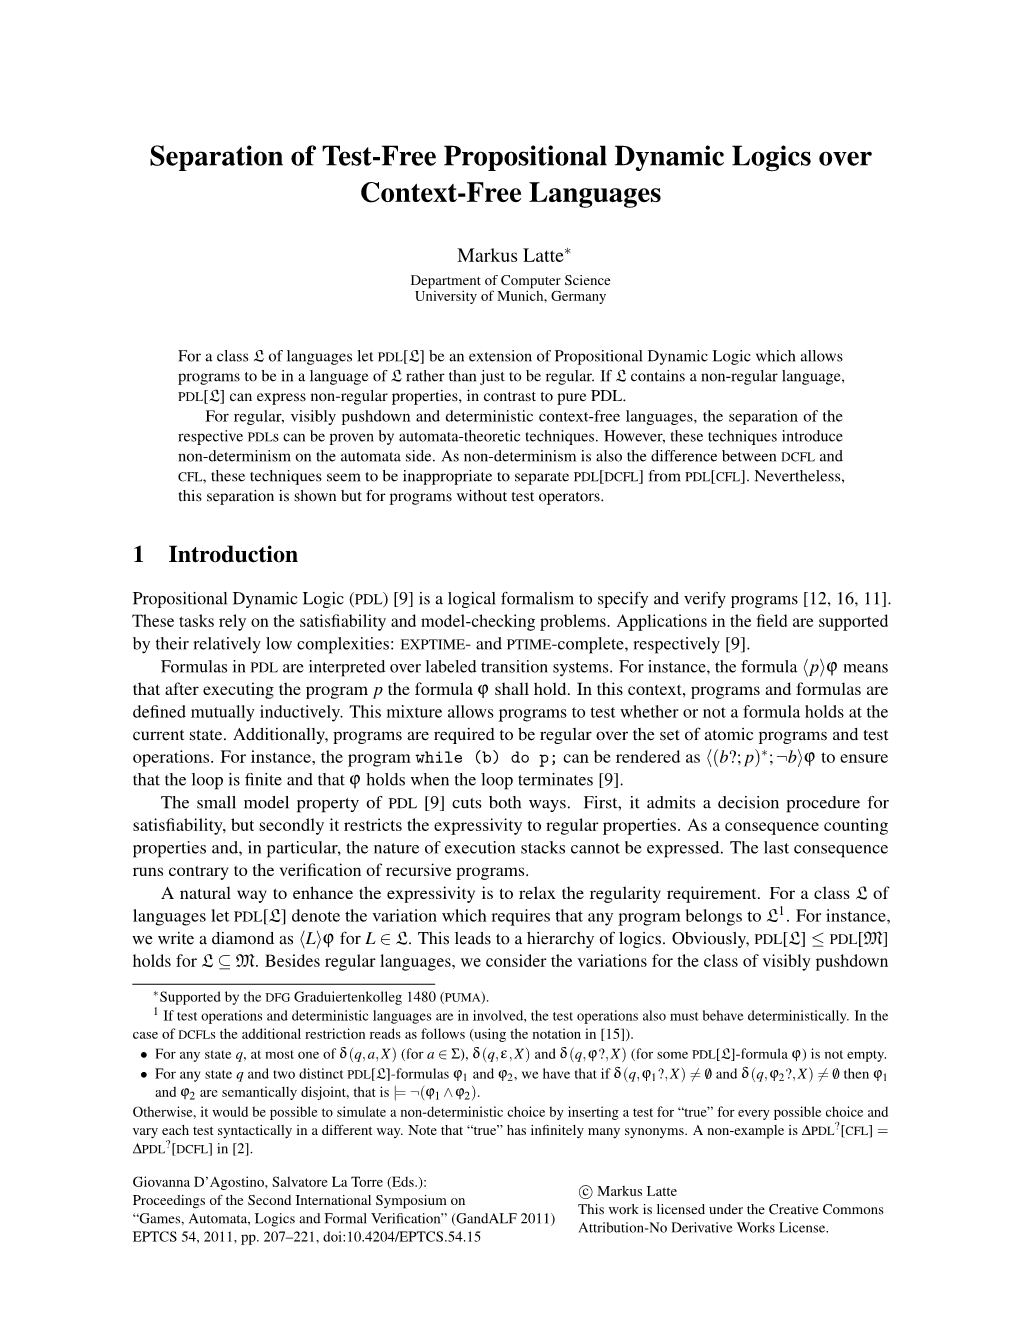 Separation of Test-Free Propositional Dynamic Logics Over Context-Free Languages